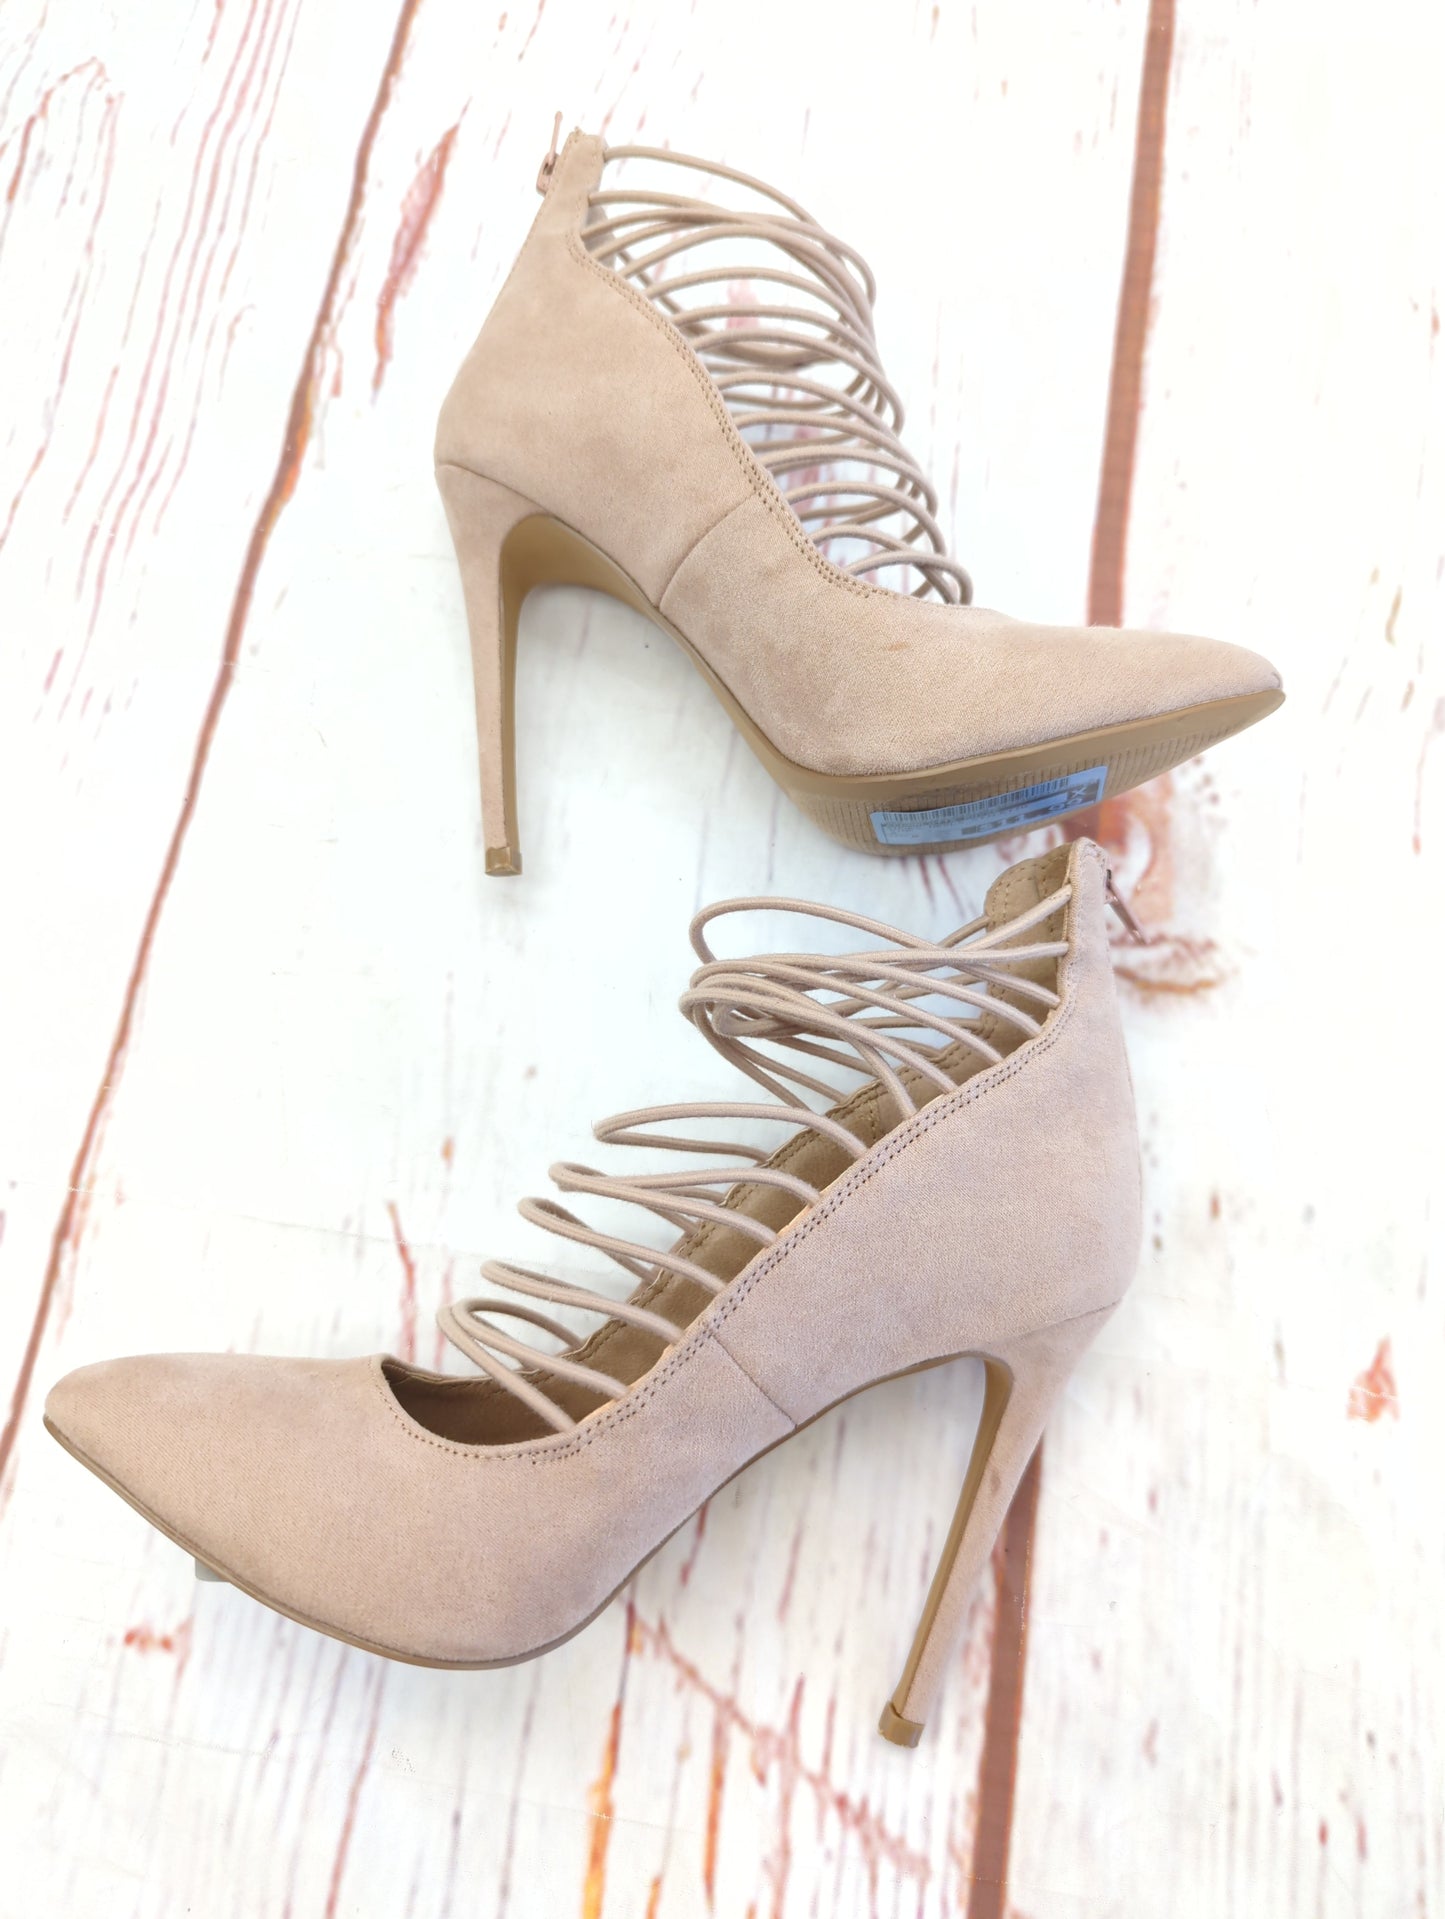 Shoes Heels Stiletto By Charlotte Russe  Size: 8